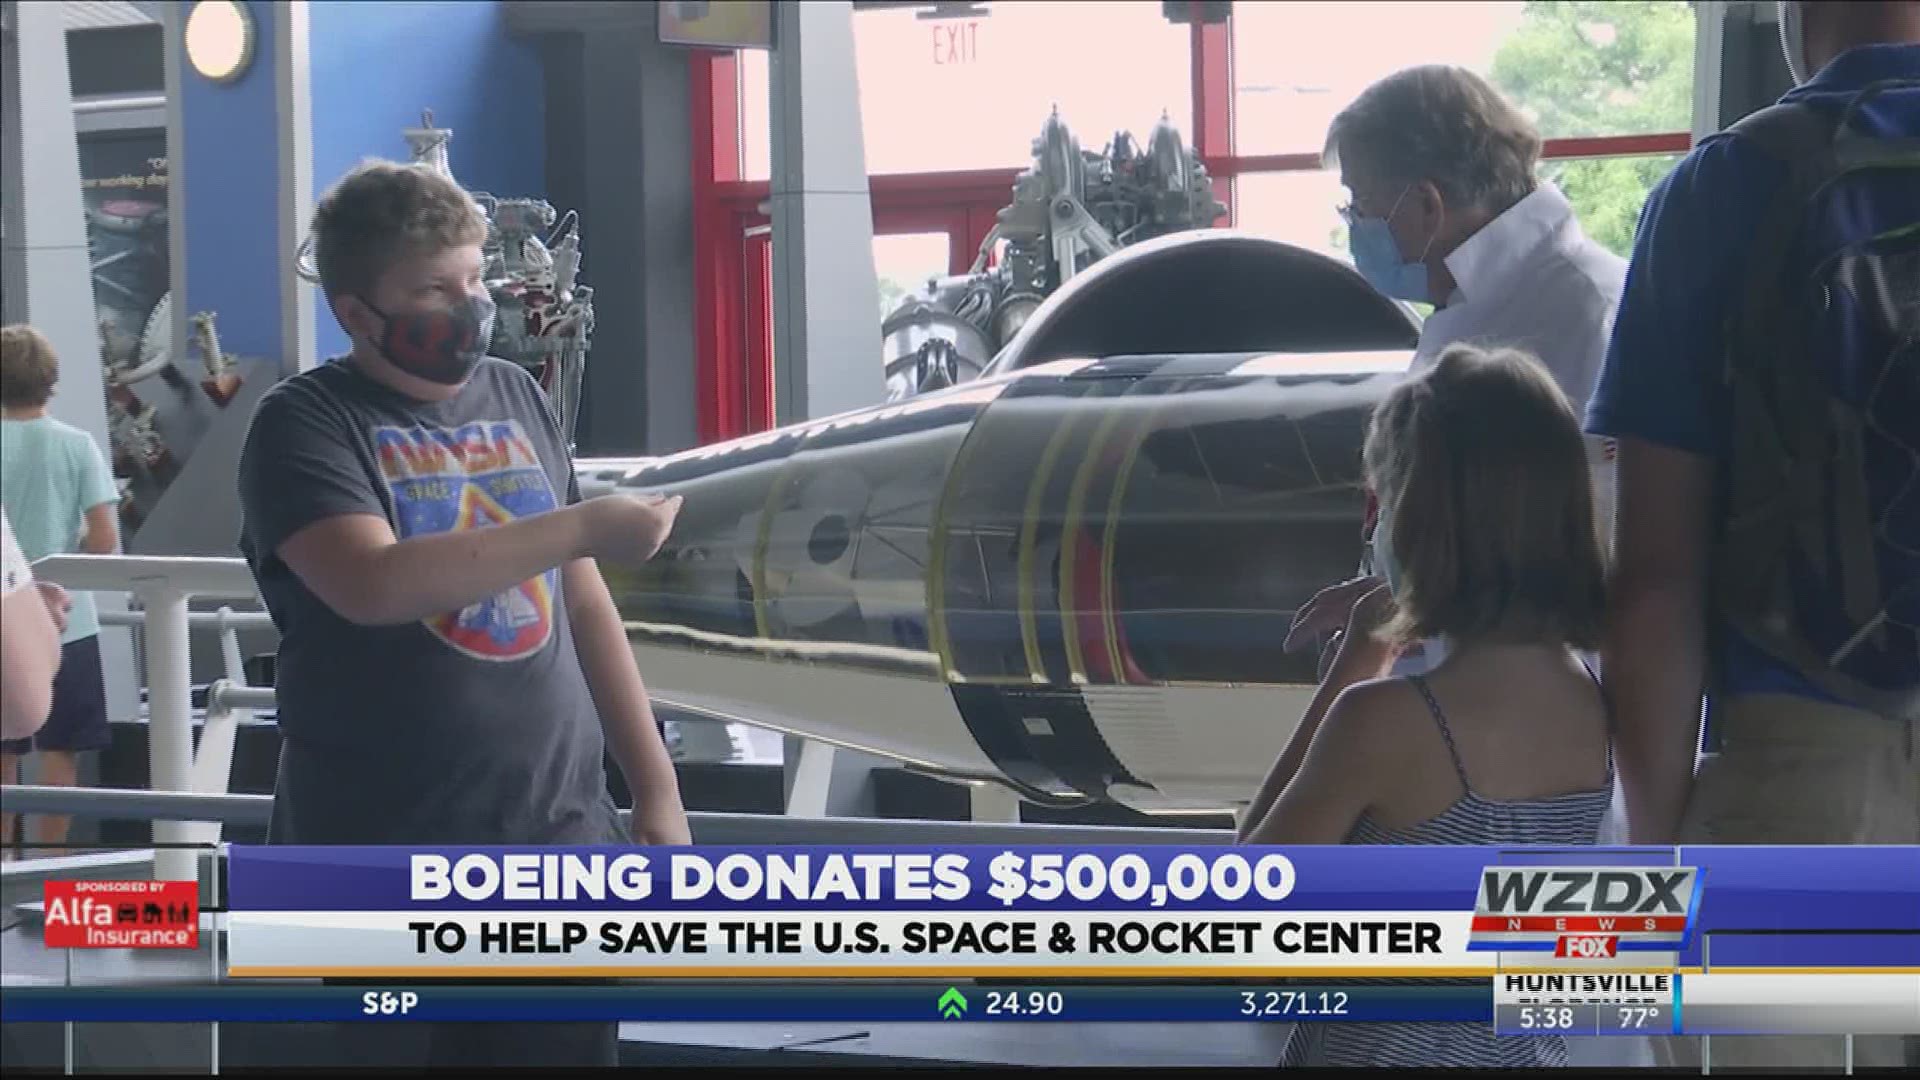 With Boeing's contribution, the #savespacecamp fun is over $1.1 million dollars.